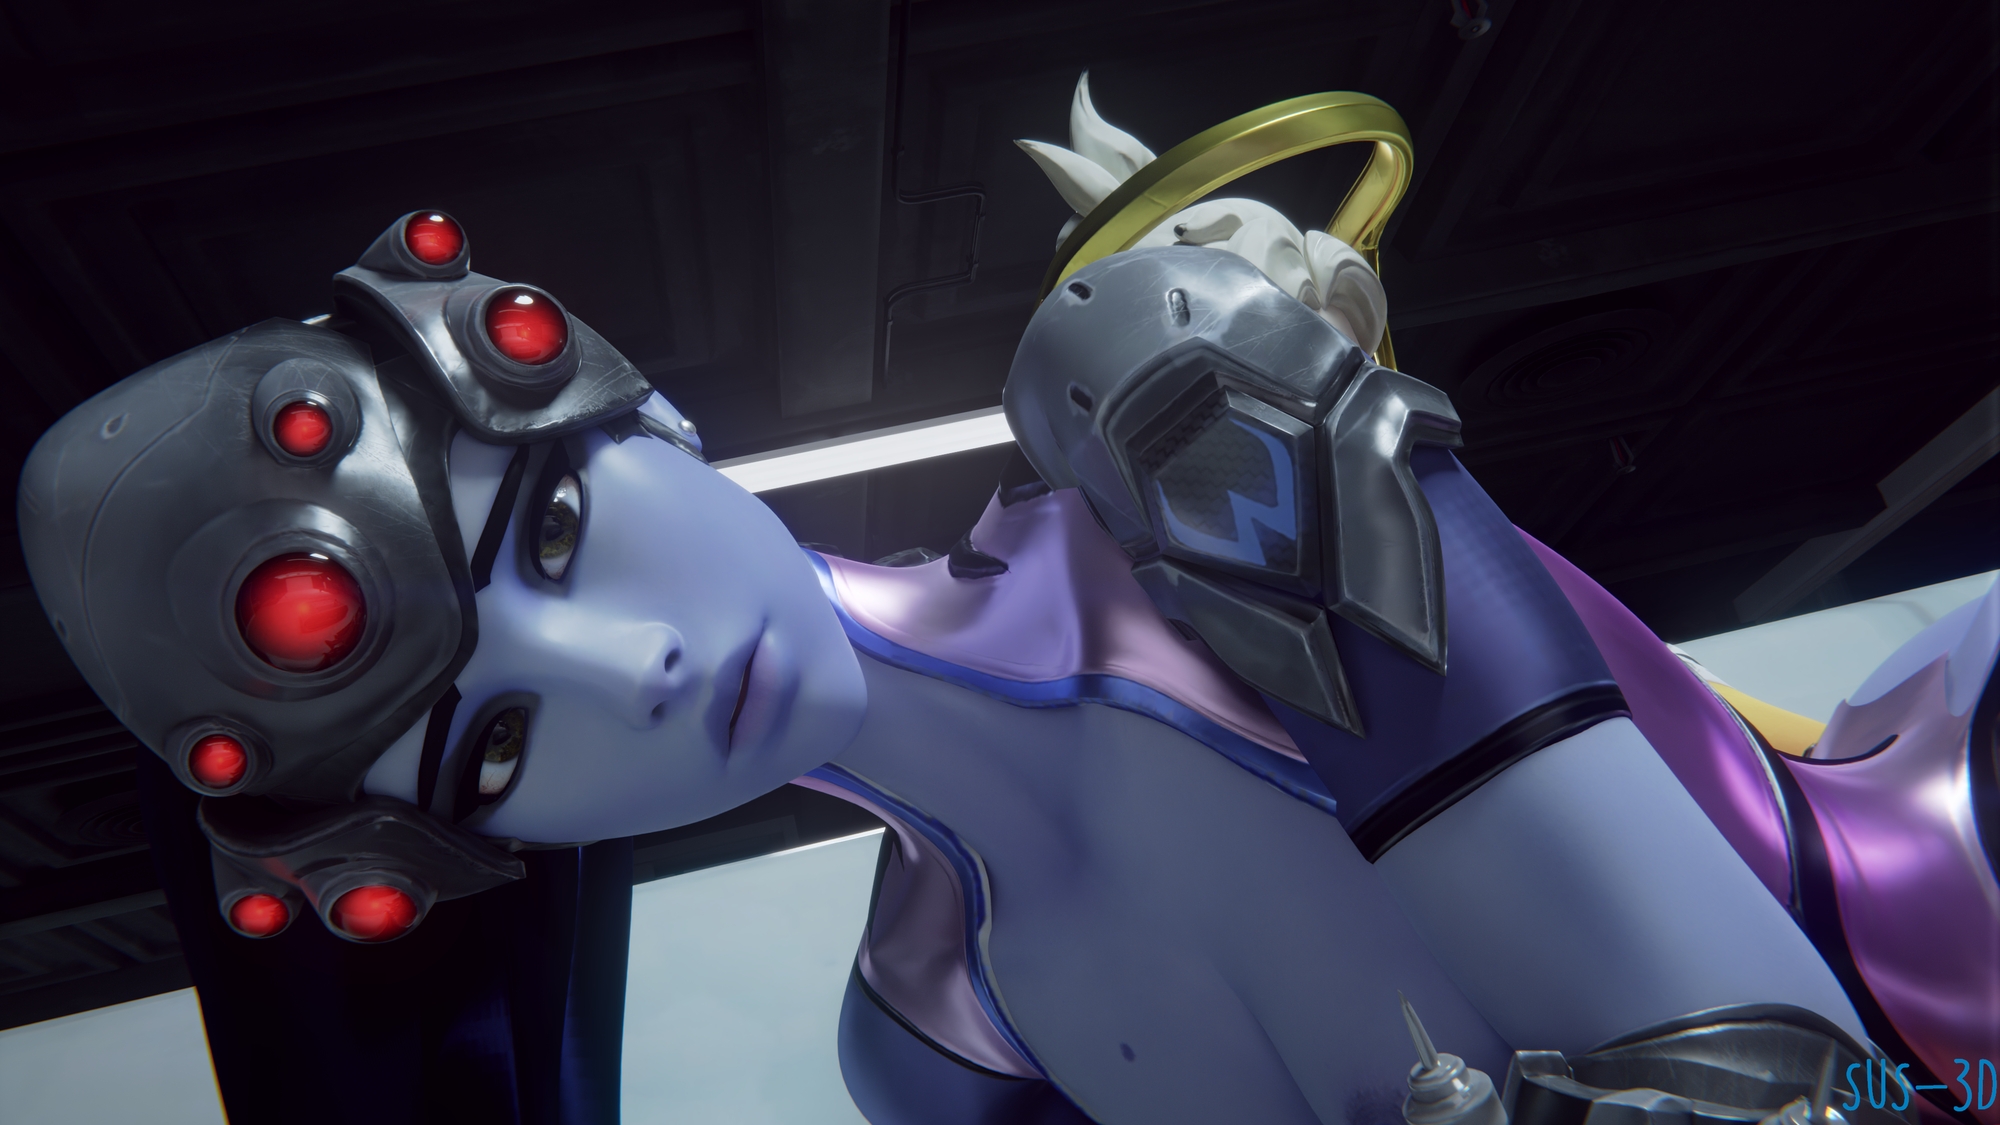 Widowmaker Chained and fucked by Mercy Dildo Overwatch 3D Porn Mercy Widowmaker Overwatch Dildo Sex Toy Lesbian Anal Chained Bondage Sex Rule34 3d Porn Feet 2